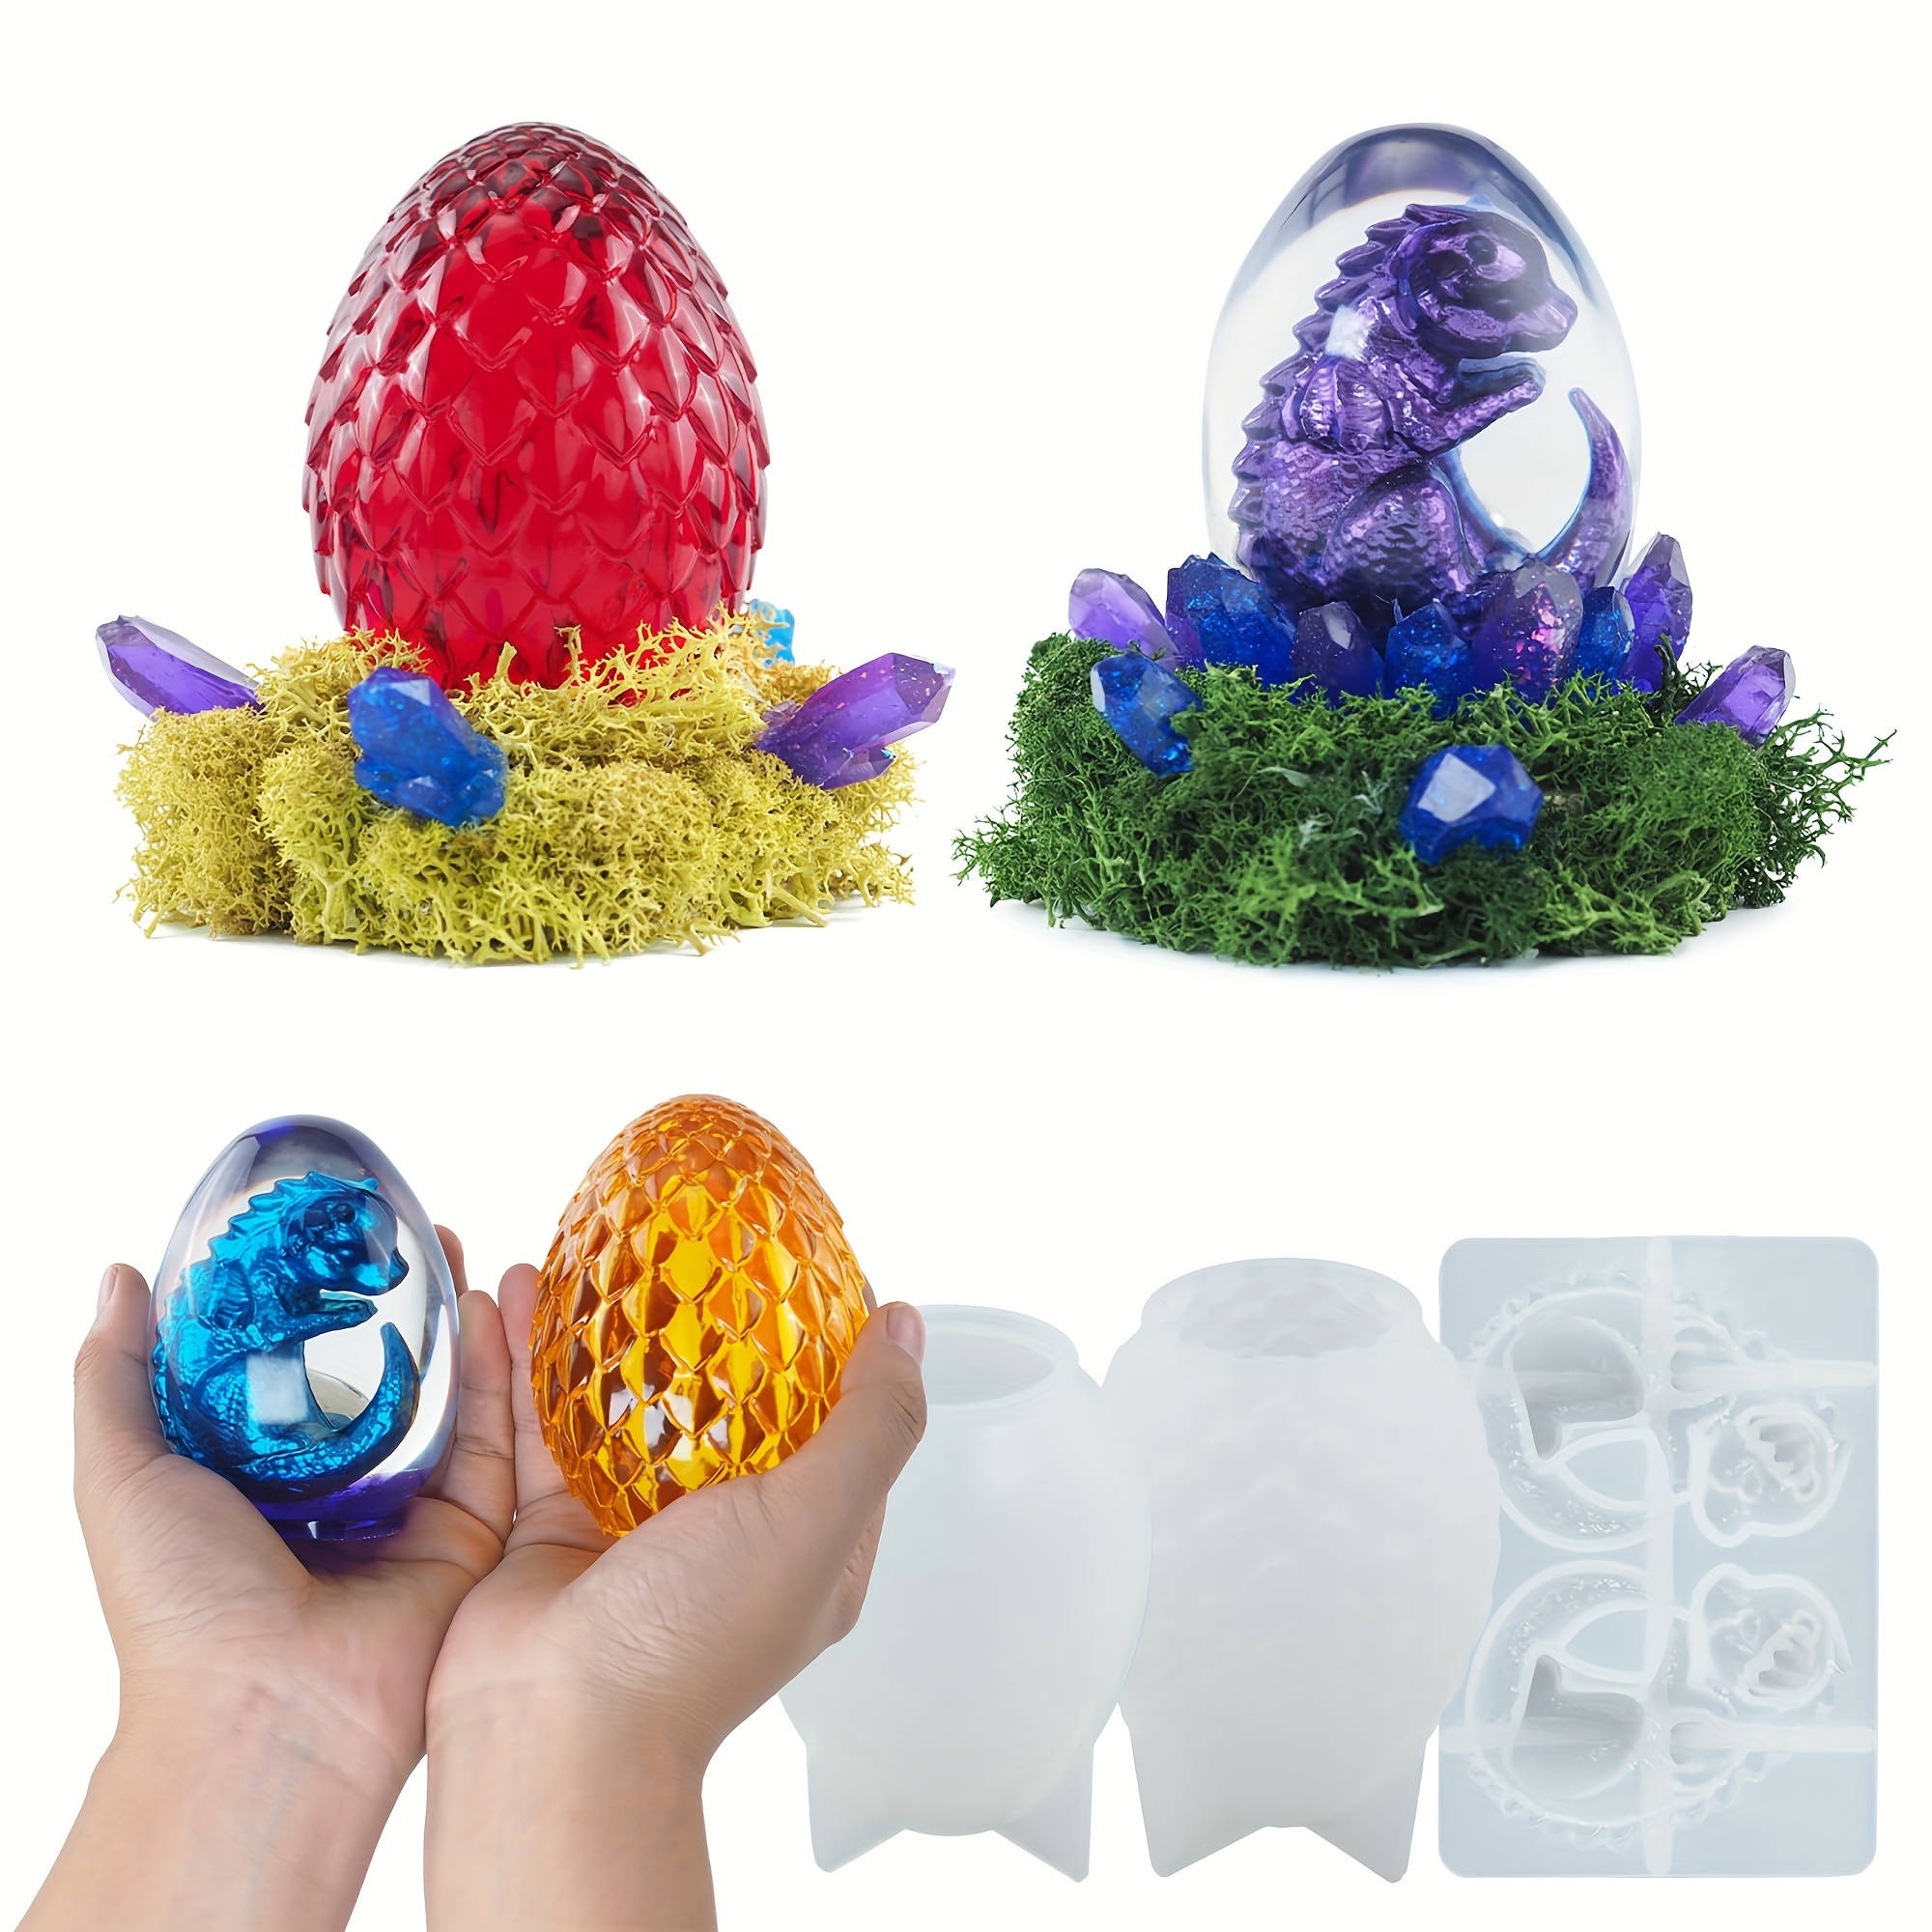 

versatile" 3-in-1 Dragon Egg Resin Molds For Candle Making, Dinosaur Figurines & Jewelry Crafting - Silicone Casting Kit